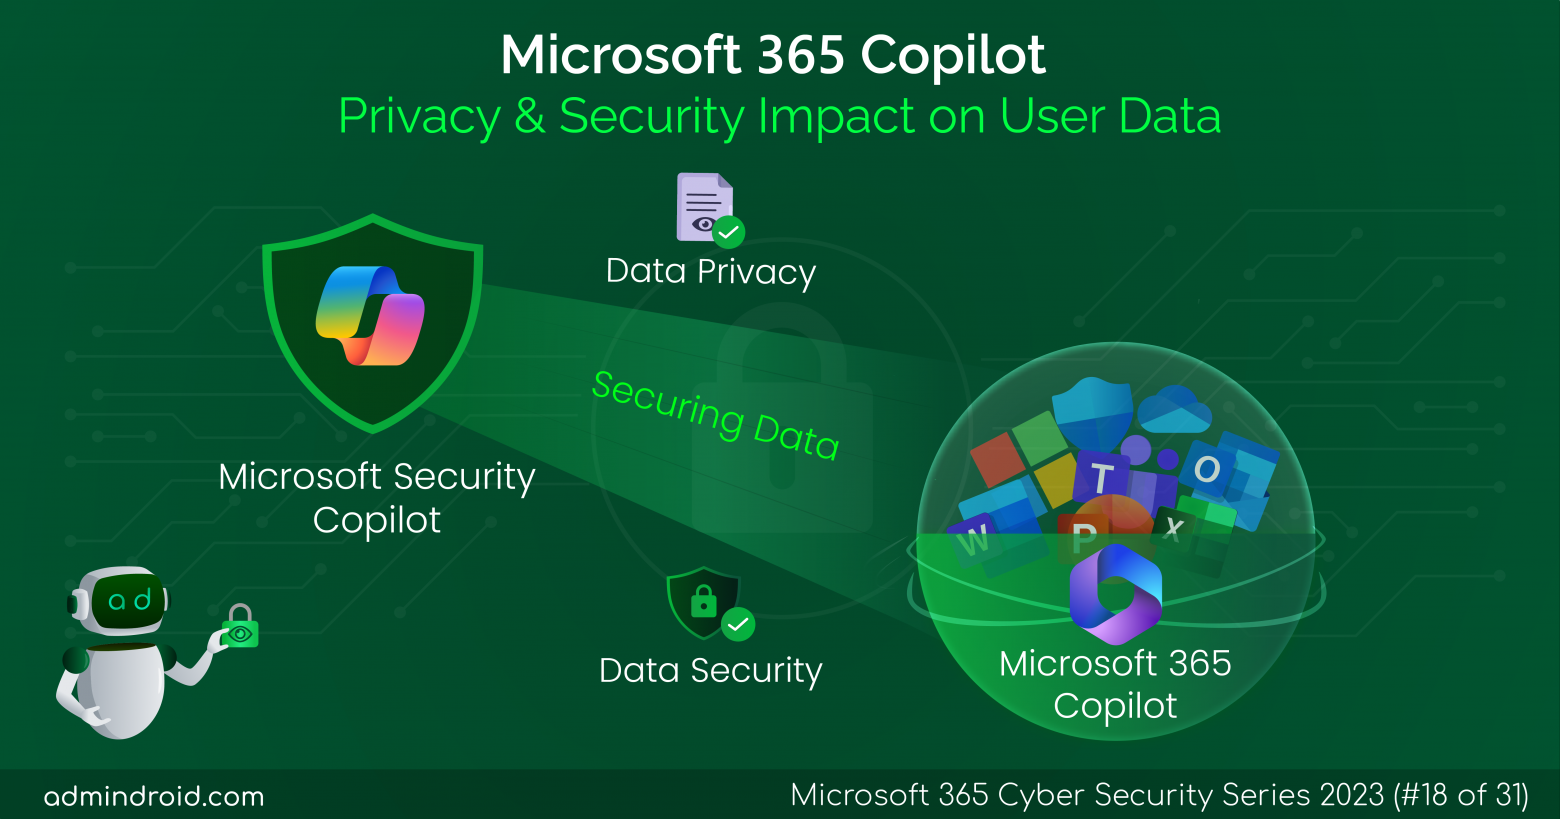 Microsoft 365 Copilot - Privacy and Security Impact on User Data